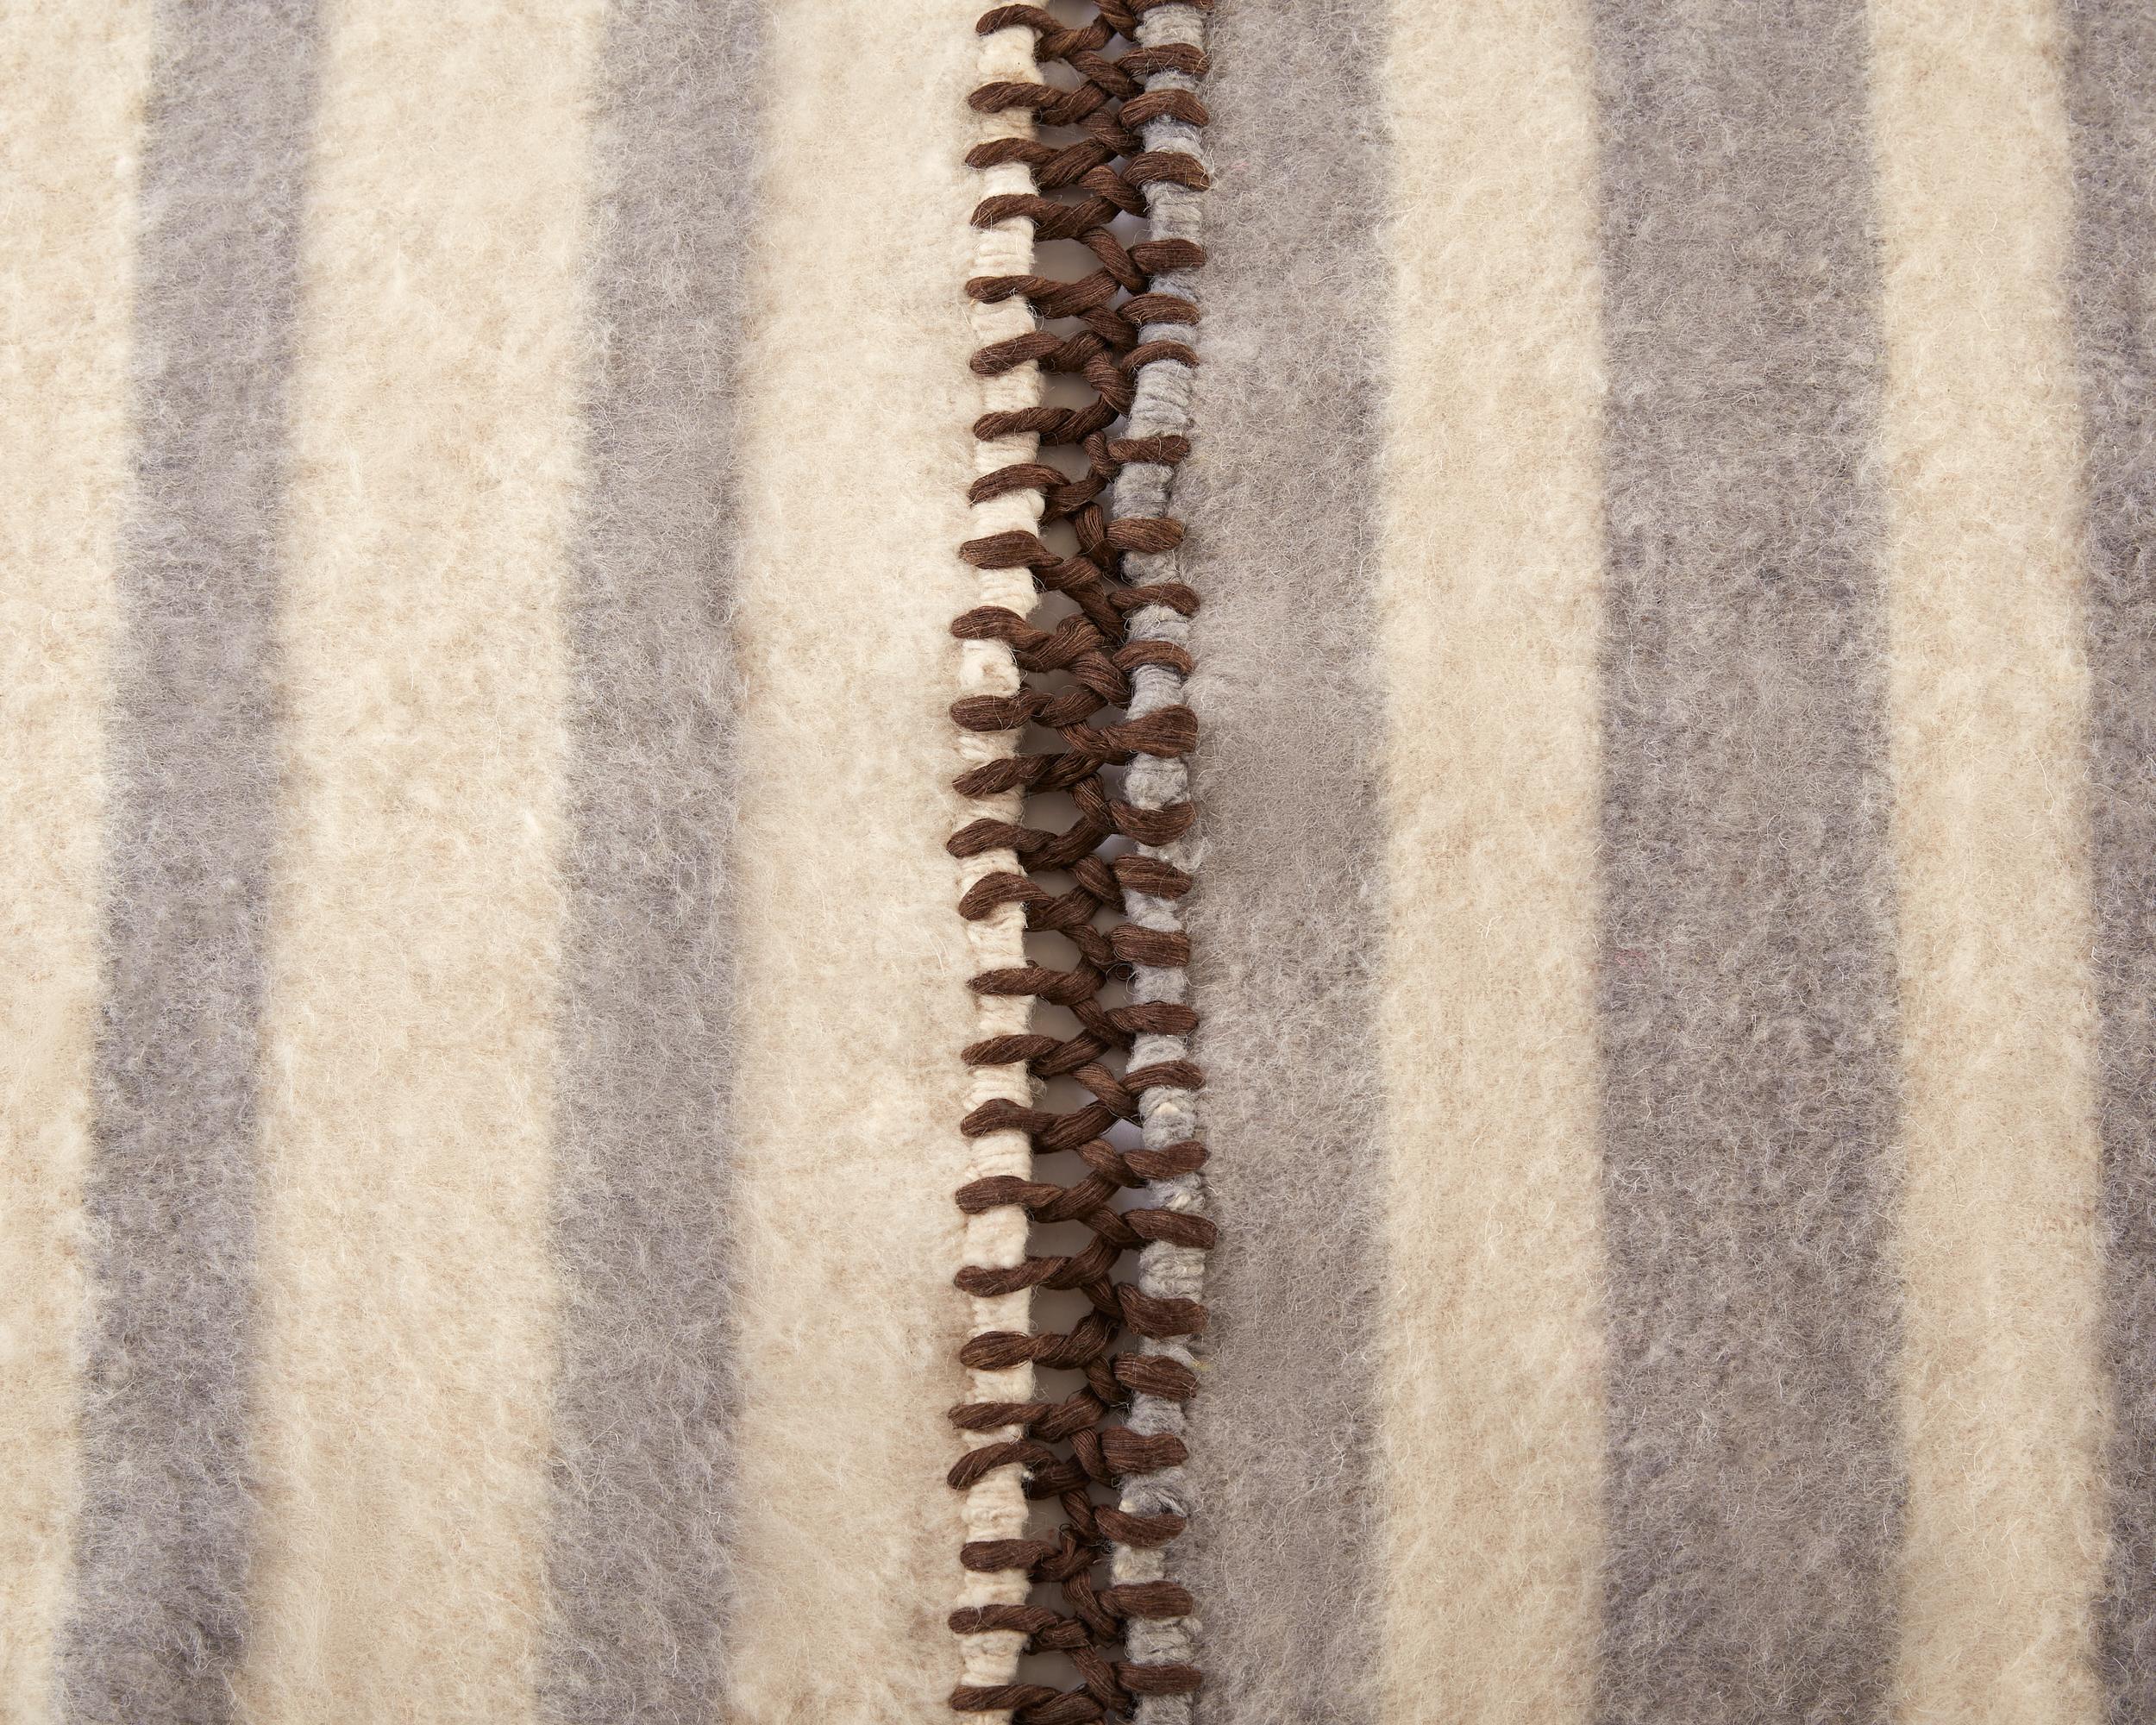 The Stripe Wool Blanket is part of our newest homeware collection. It is made on an artisanal floor loom, using cotton and natural wool sourced from Momostenango, Guatemala. Each color is hand dyed. It is an accessory perfect to keep you warm or